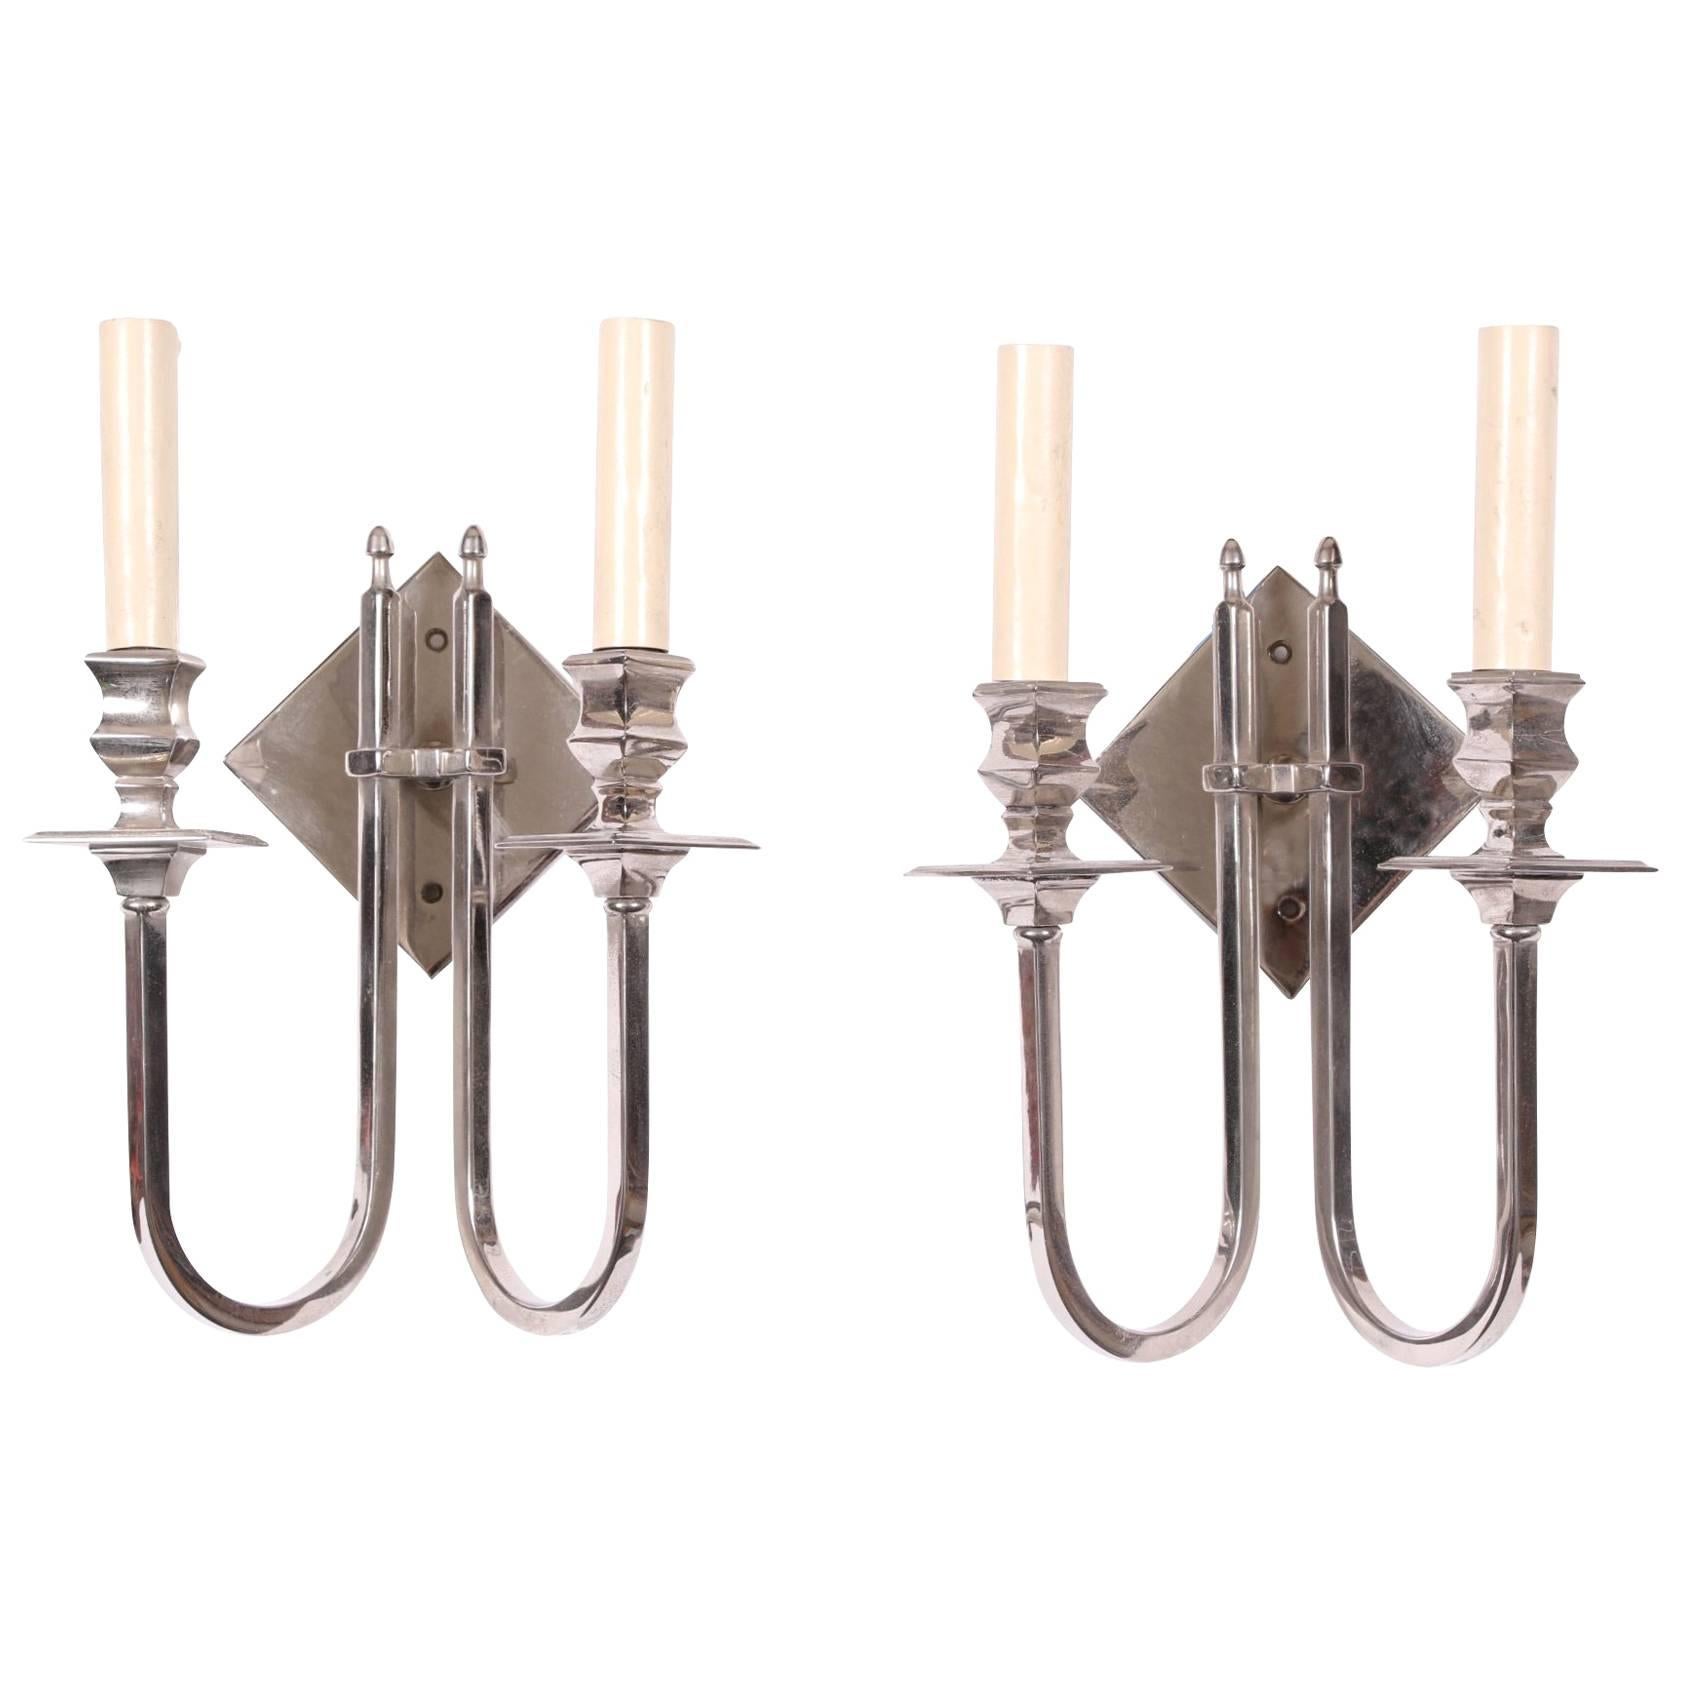 Pair of Chrome-Plated Brass Twin Light Wall Sconces